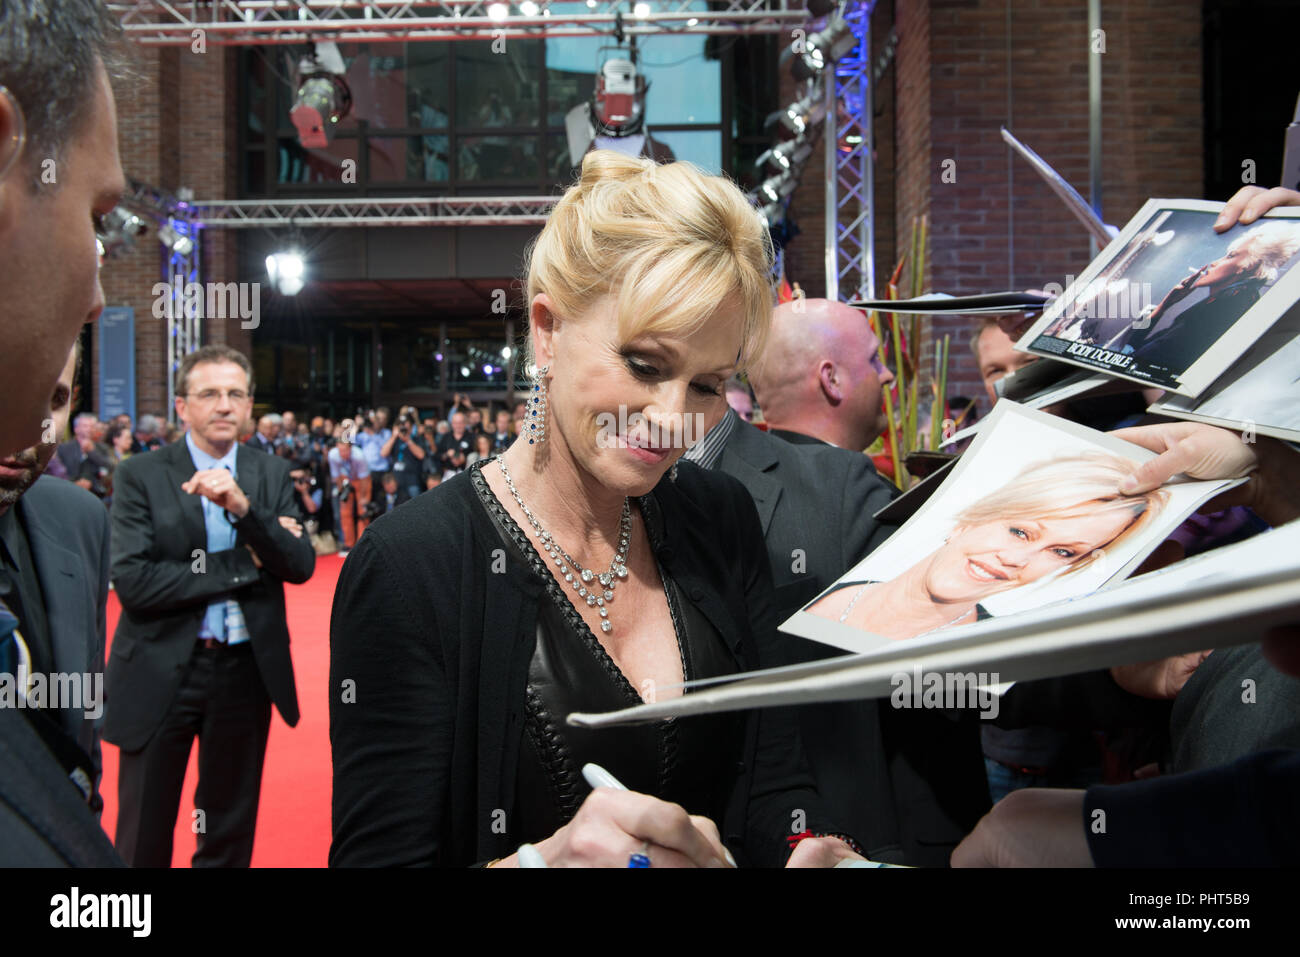 Actress Melanie Griffith gives autographs at Filmfest München 2012 Stock Photo